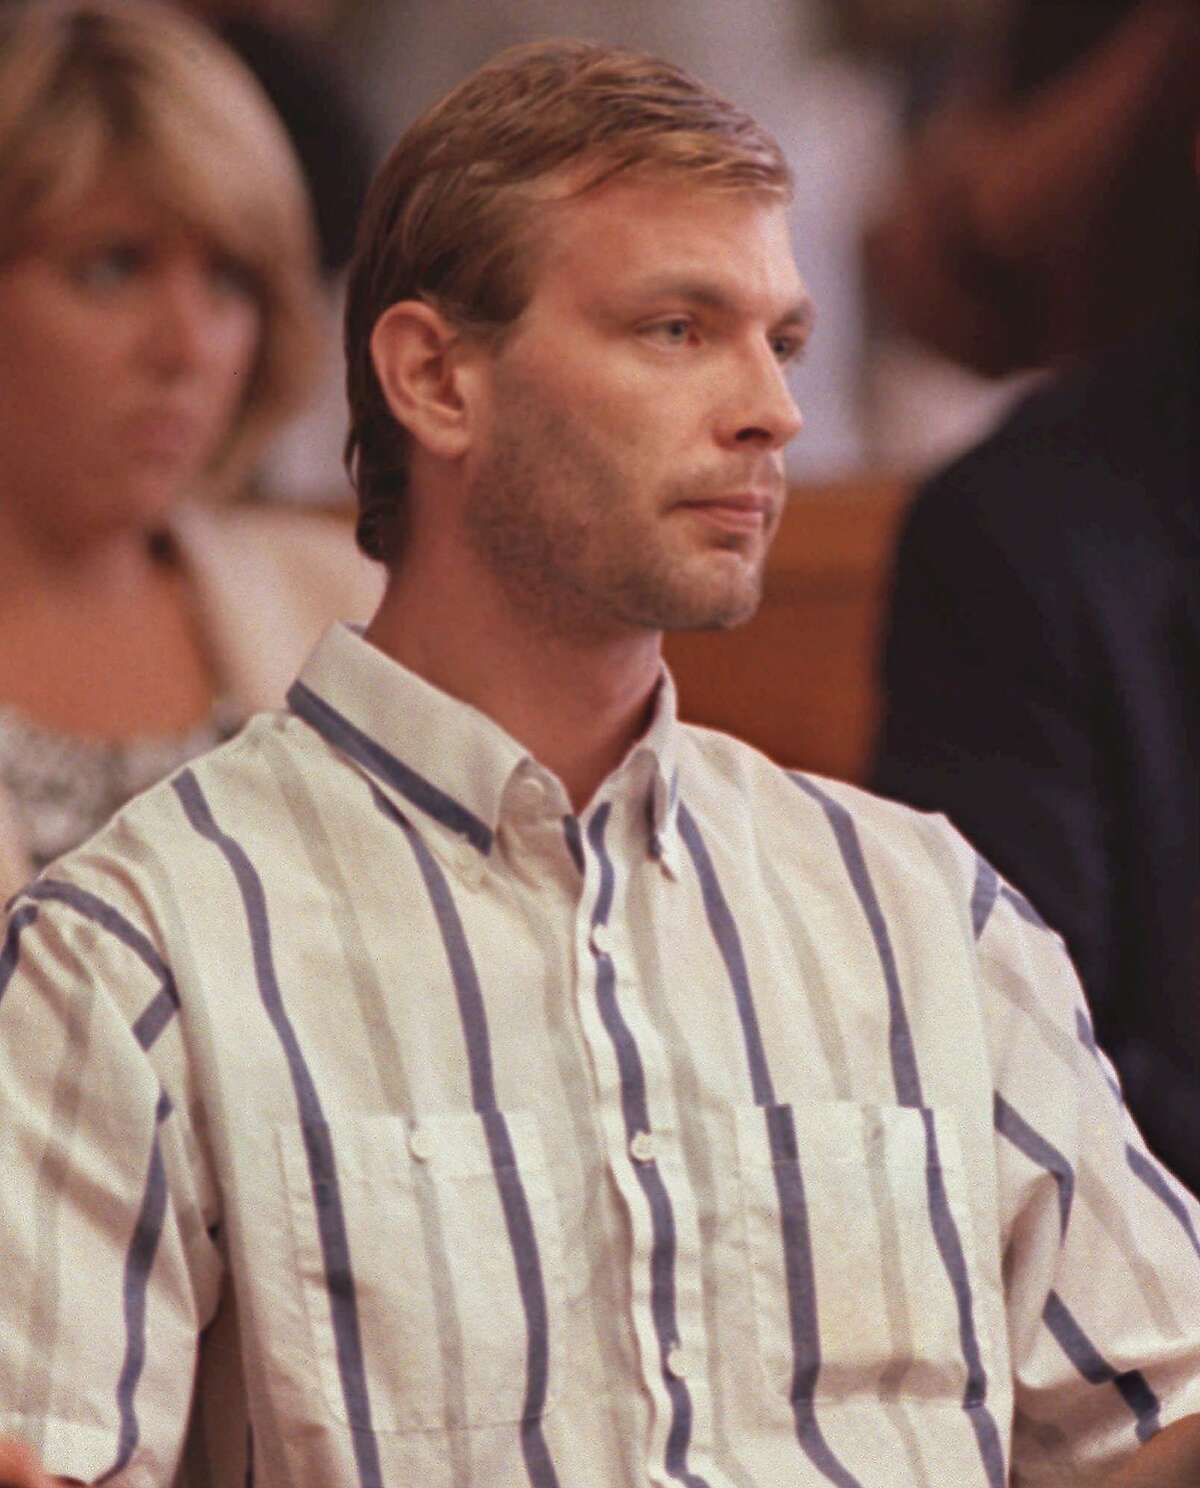 A year after his first murder serial killer Jeffrey Dahmer moved to